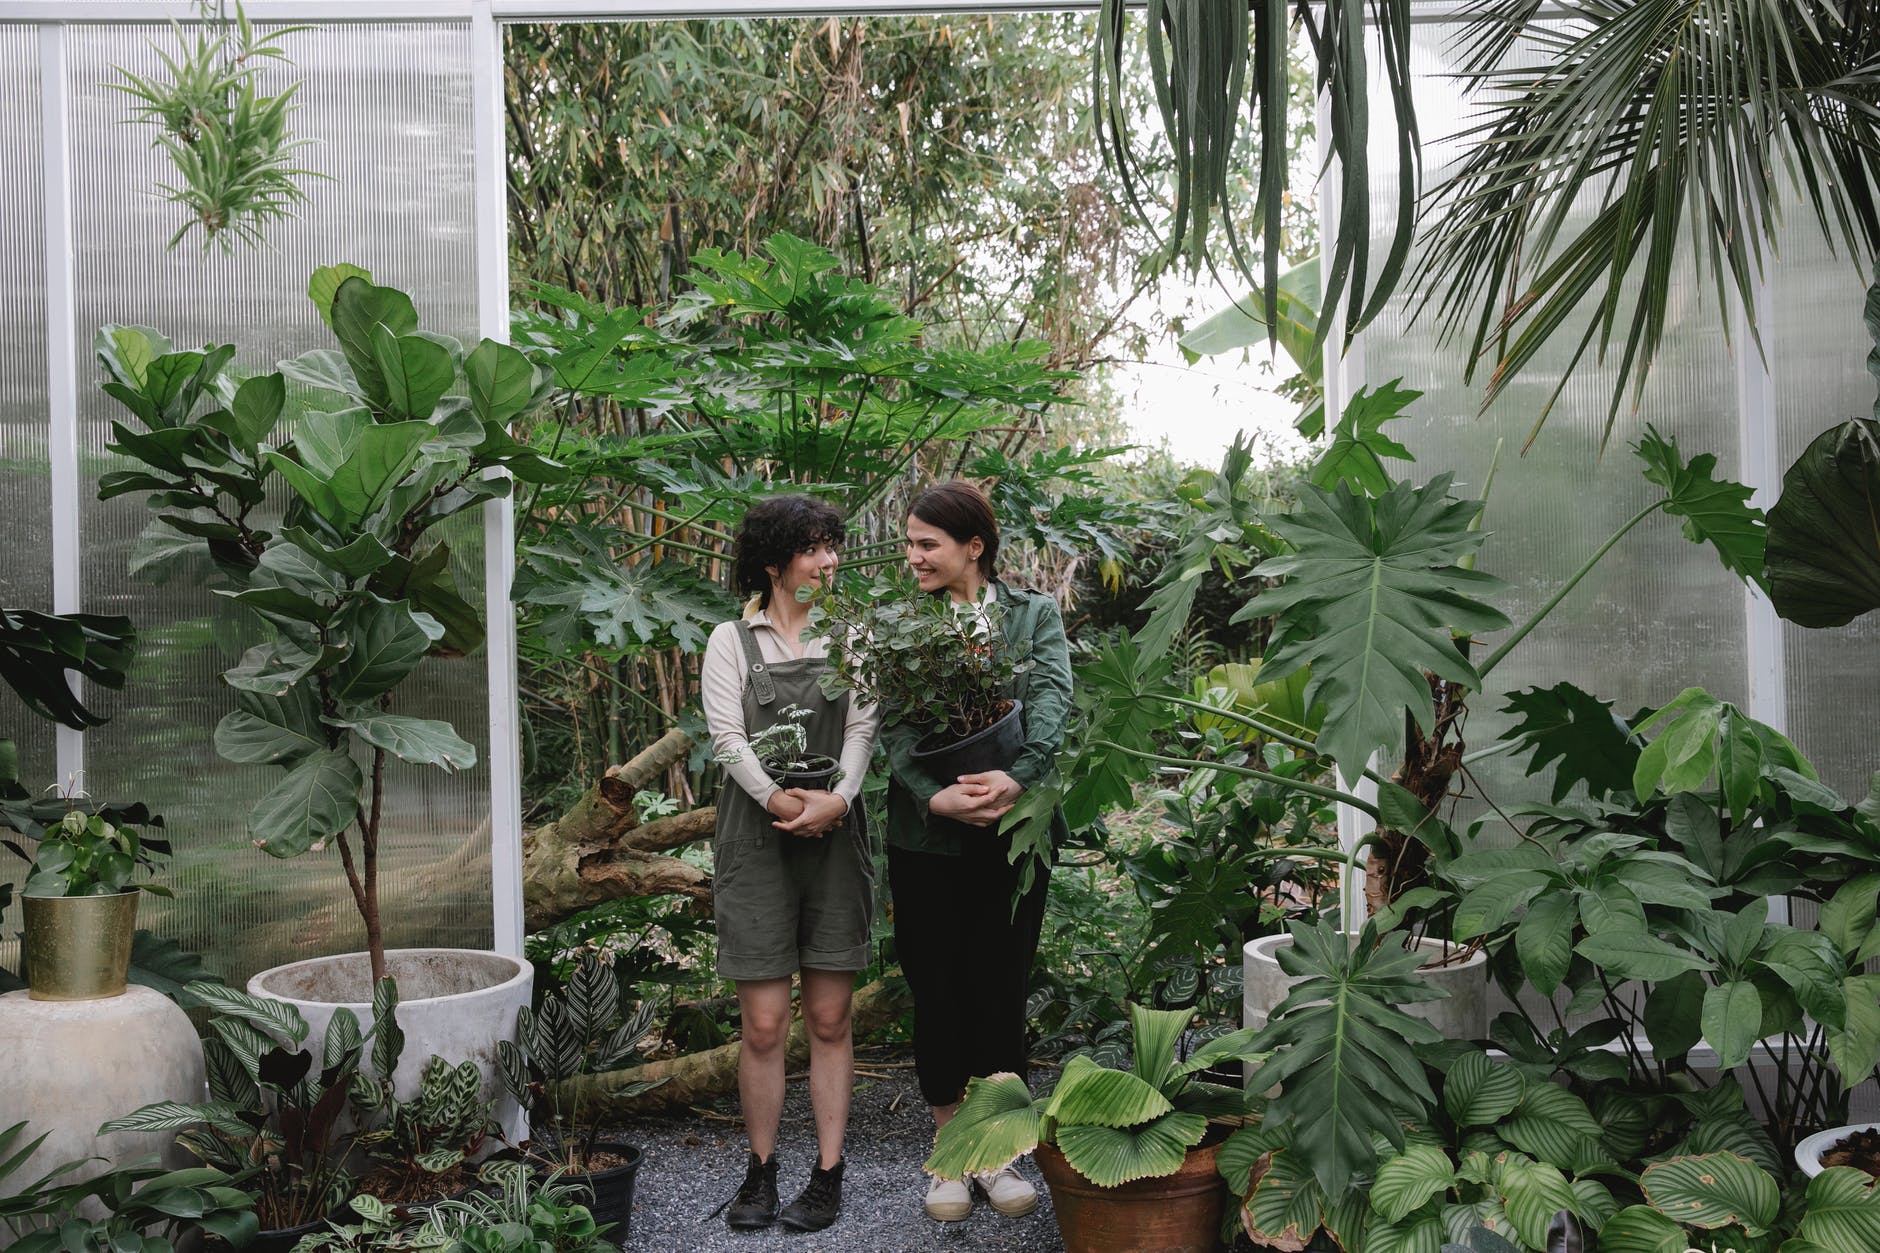 ethnic women with green plants in hothouse